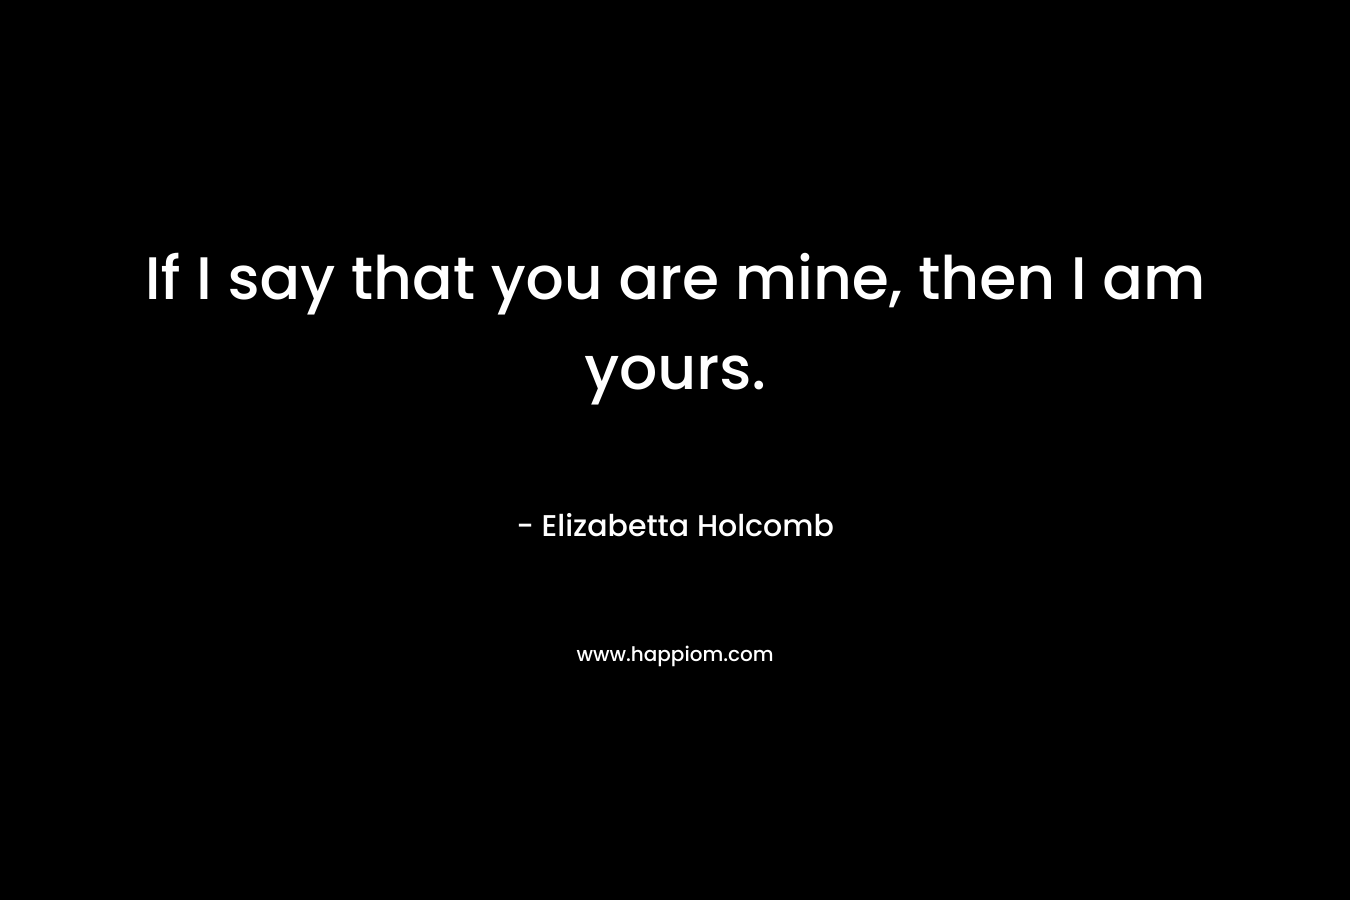 If I say that you are mine, then I am yours. – Elizabetta Holcomb